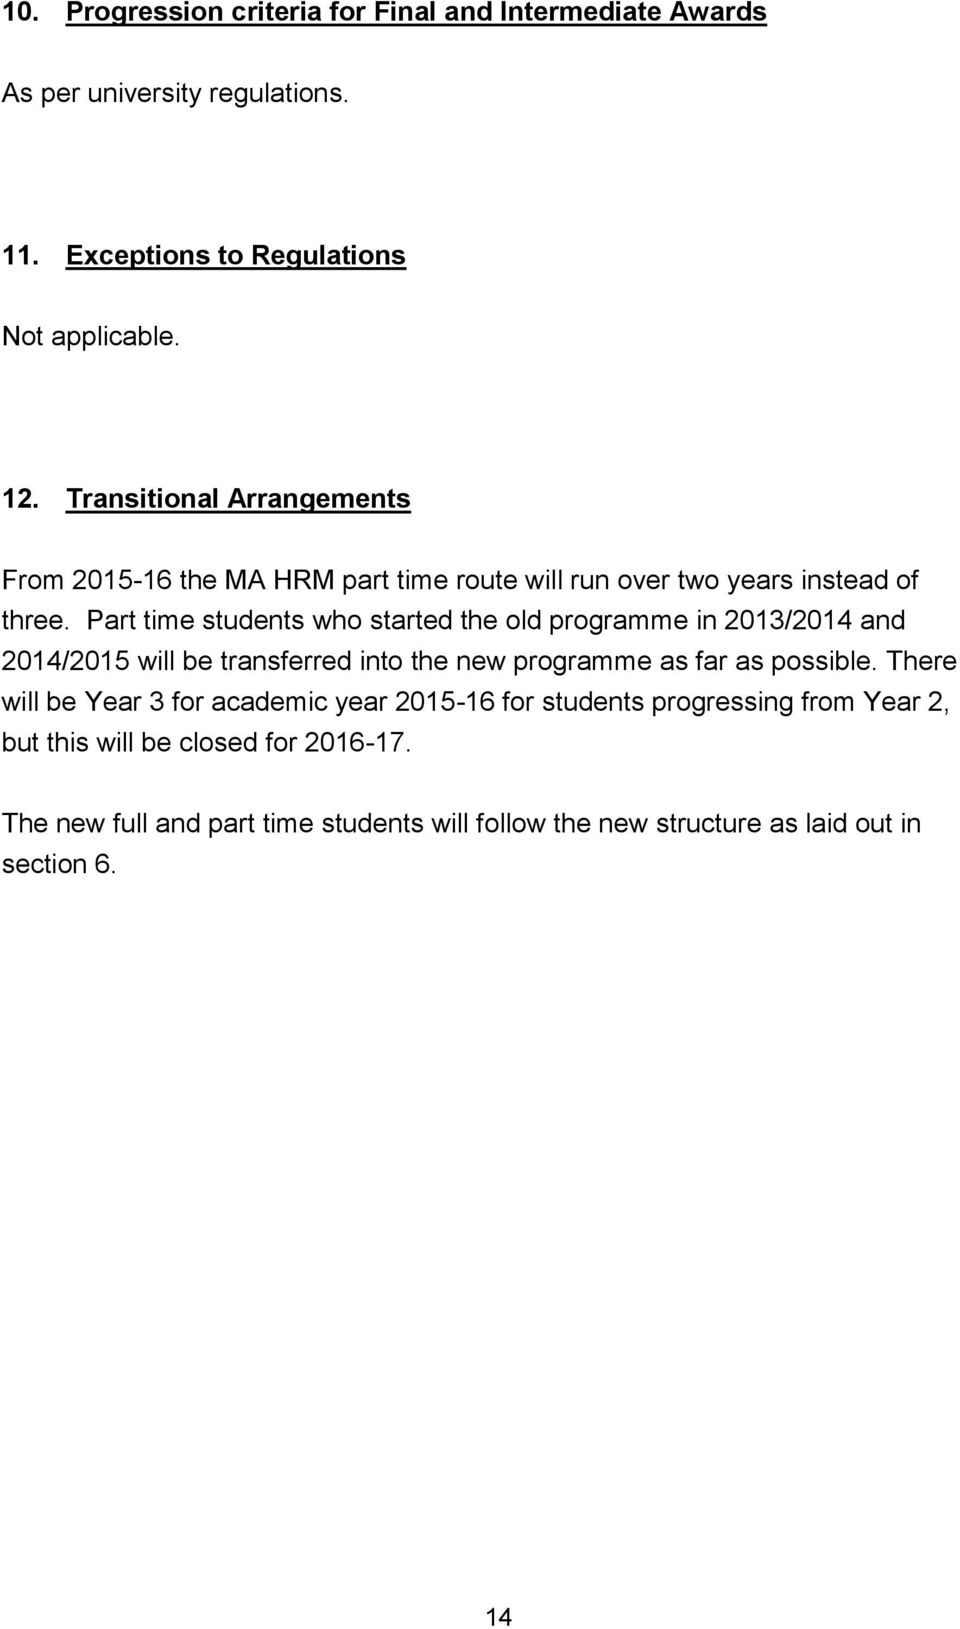 Part time students who started the old programme in 2013/2014 and 2014/2015 will be transferred into the new programme as far as possible.